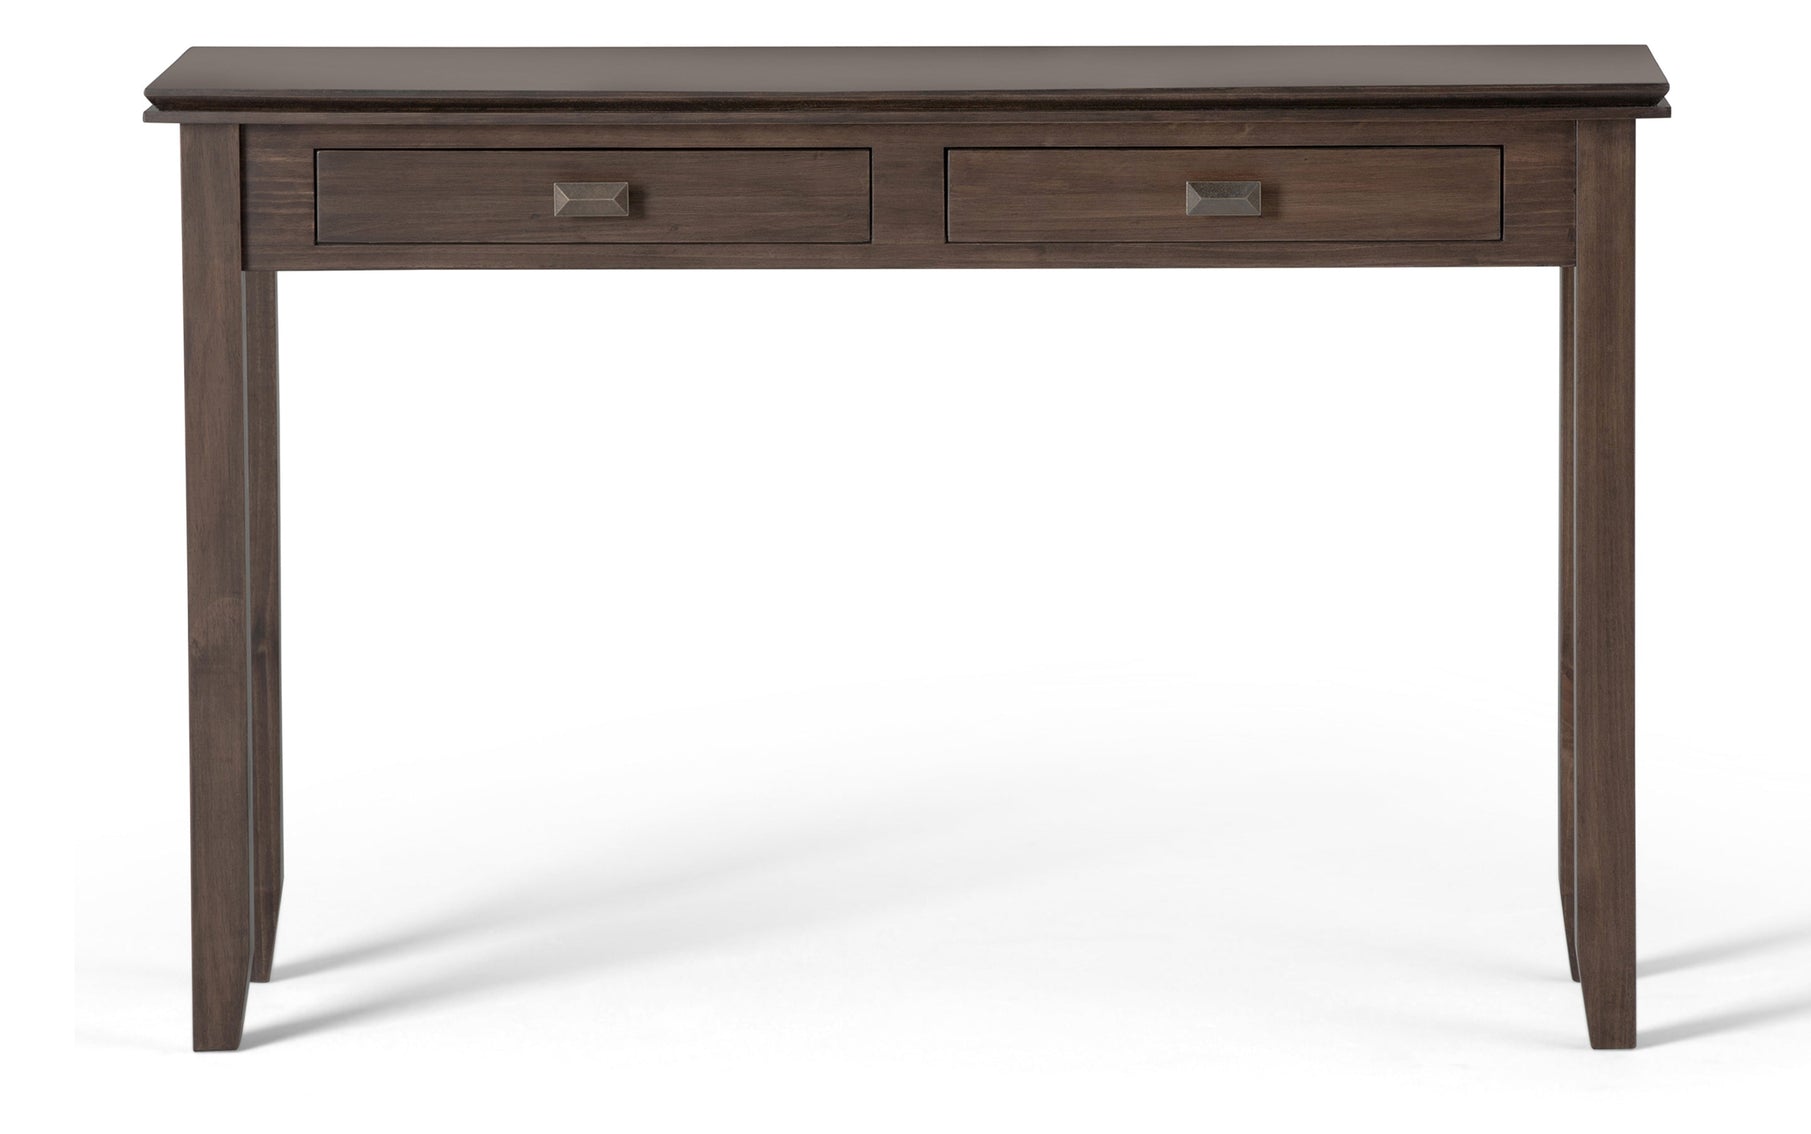 Natural Aged Brown | Artisan 46 inch Console Sofa Table